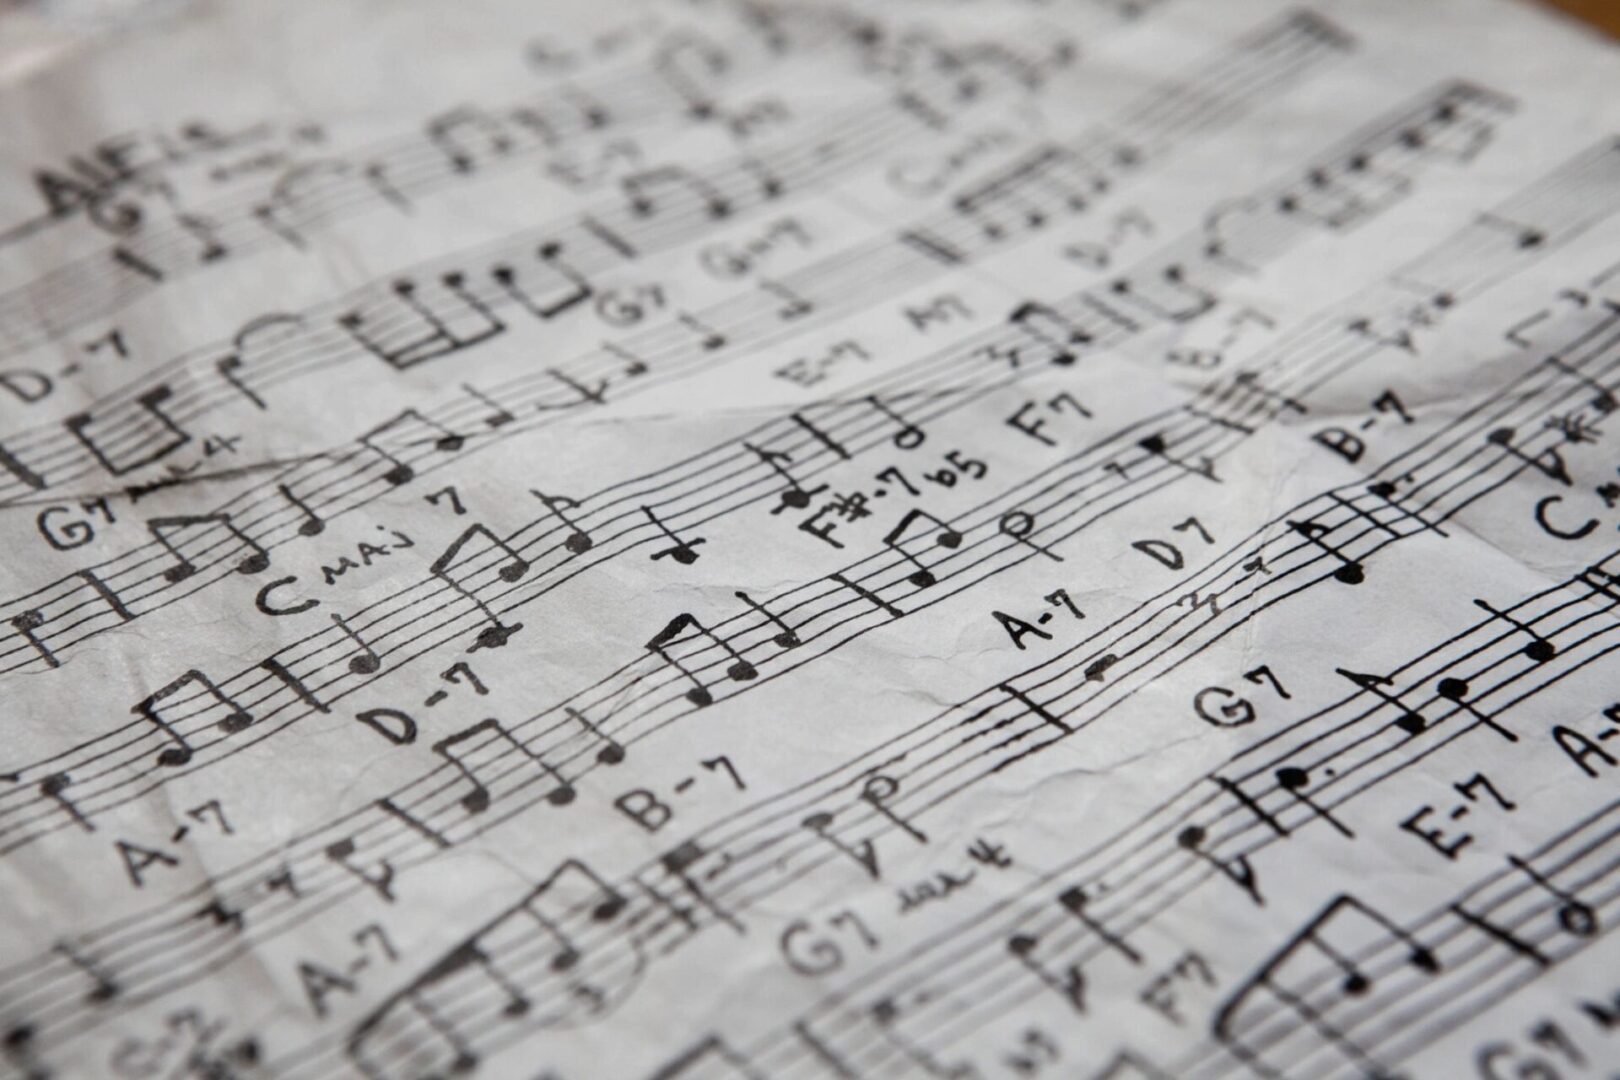 A sheet of music with handwritten notes on it.